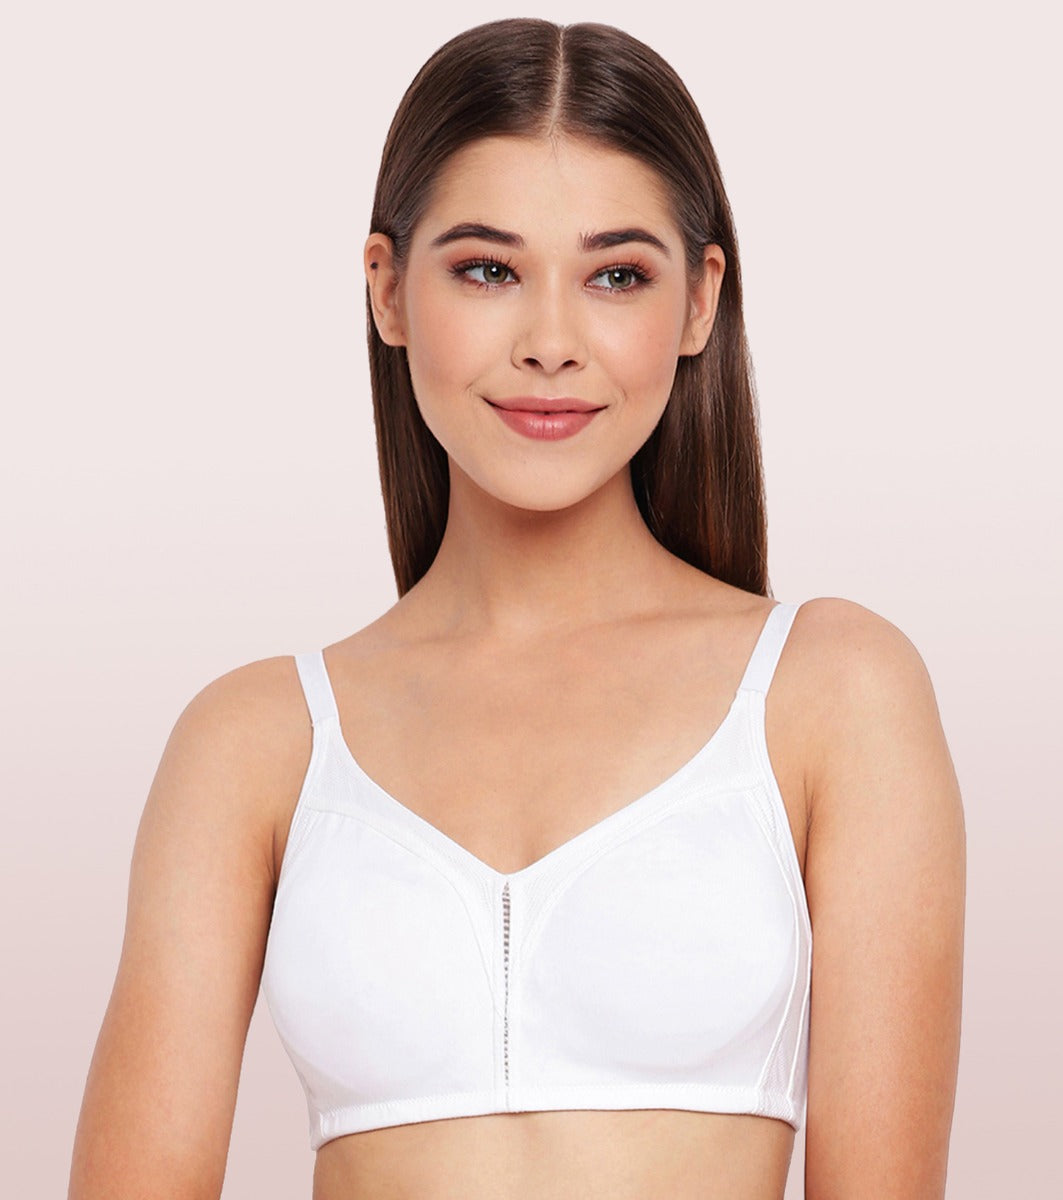 Enamor Fab-Cool AB75 M-frame Jiggle Control Full Support Stretch Cotton Bra for Women- Full Coverage, Non Padded and Wirefree - White